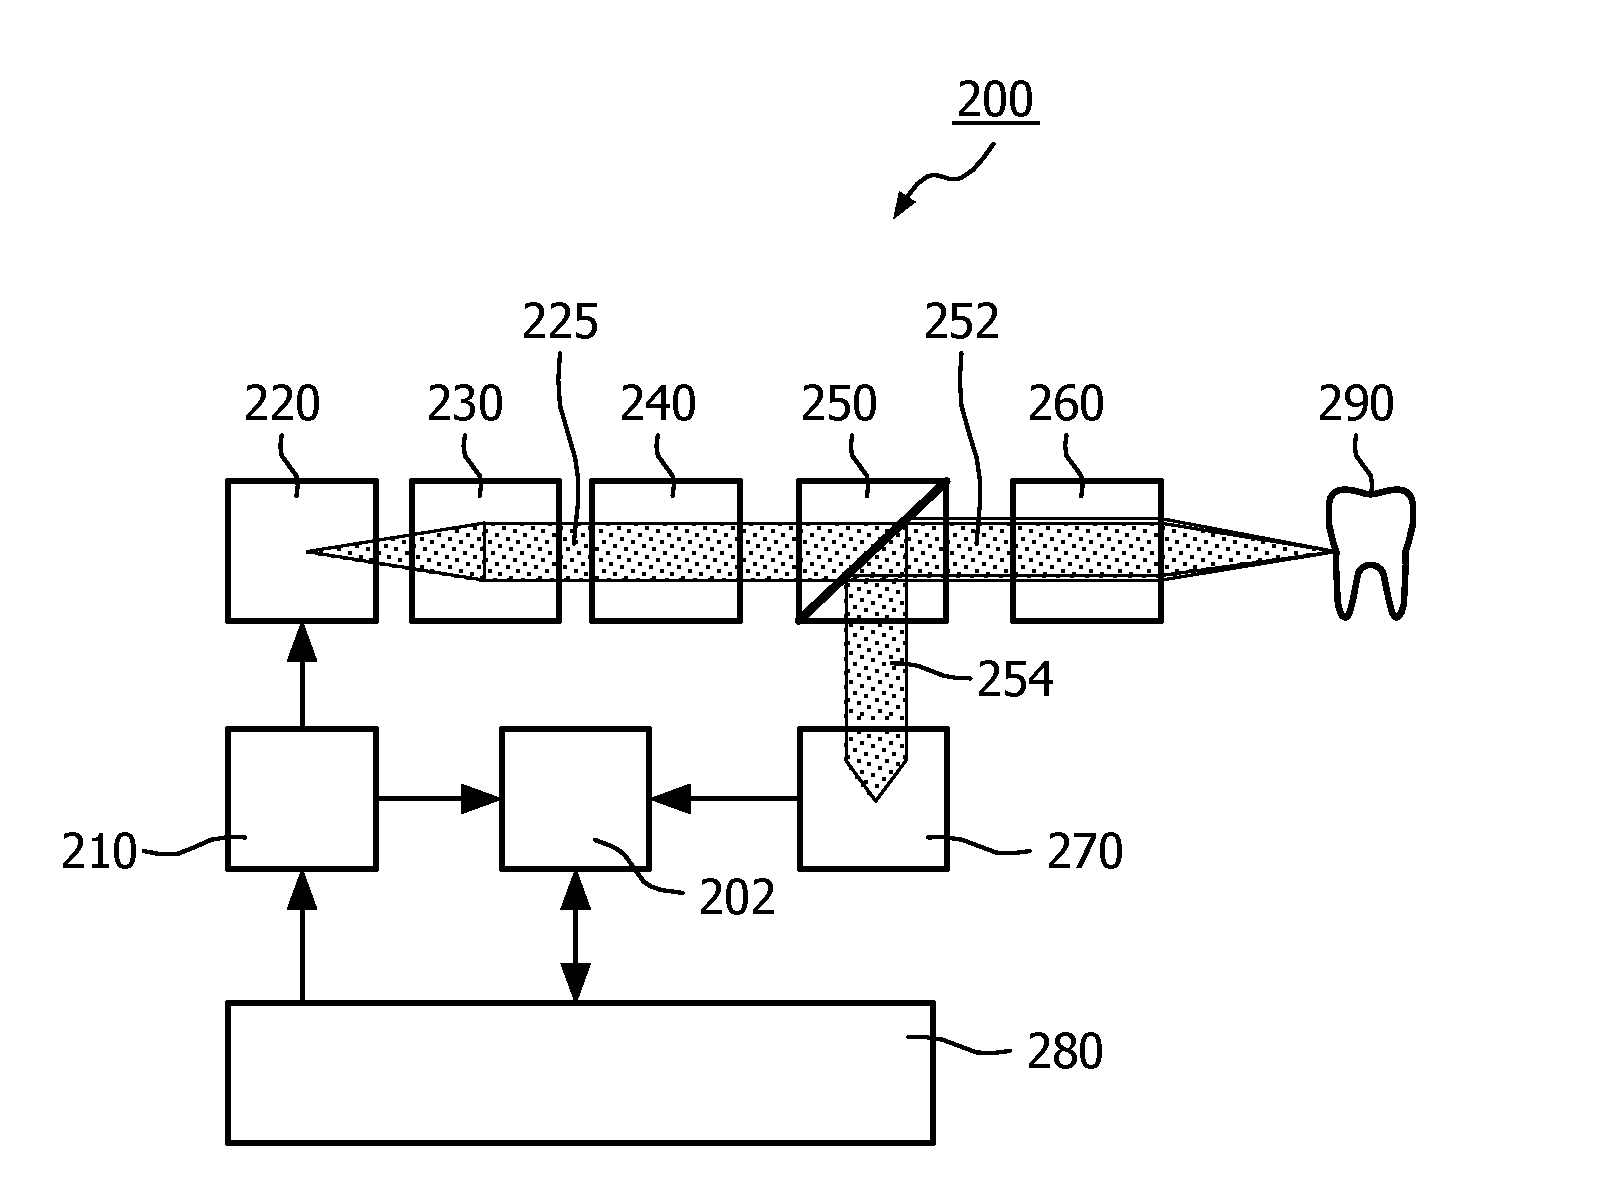 Frequency domain time resolved fluorescence method and system for plaque detection